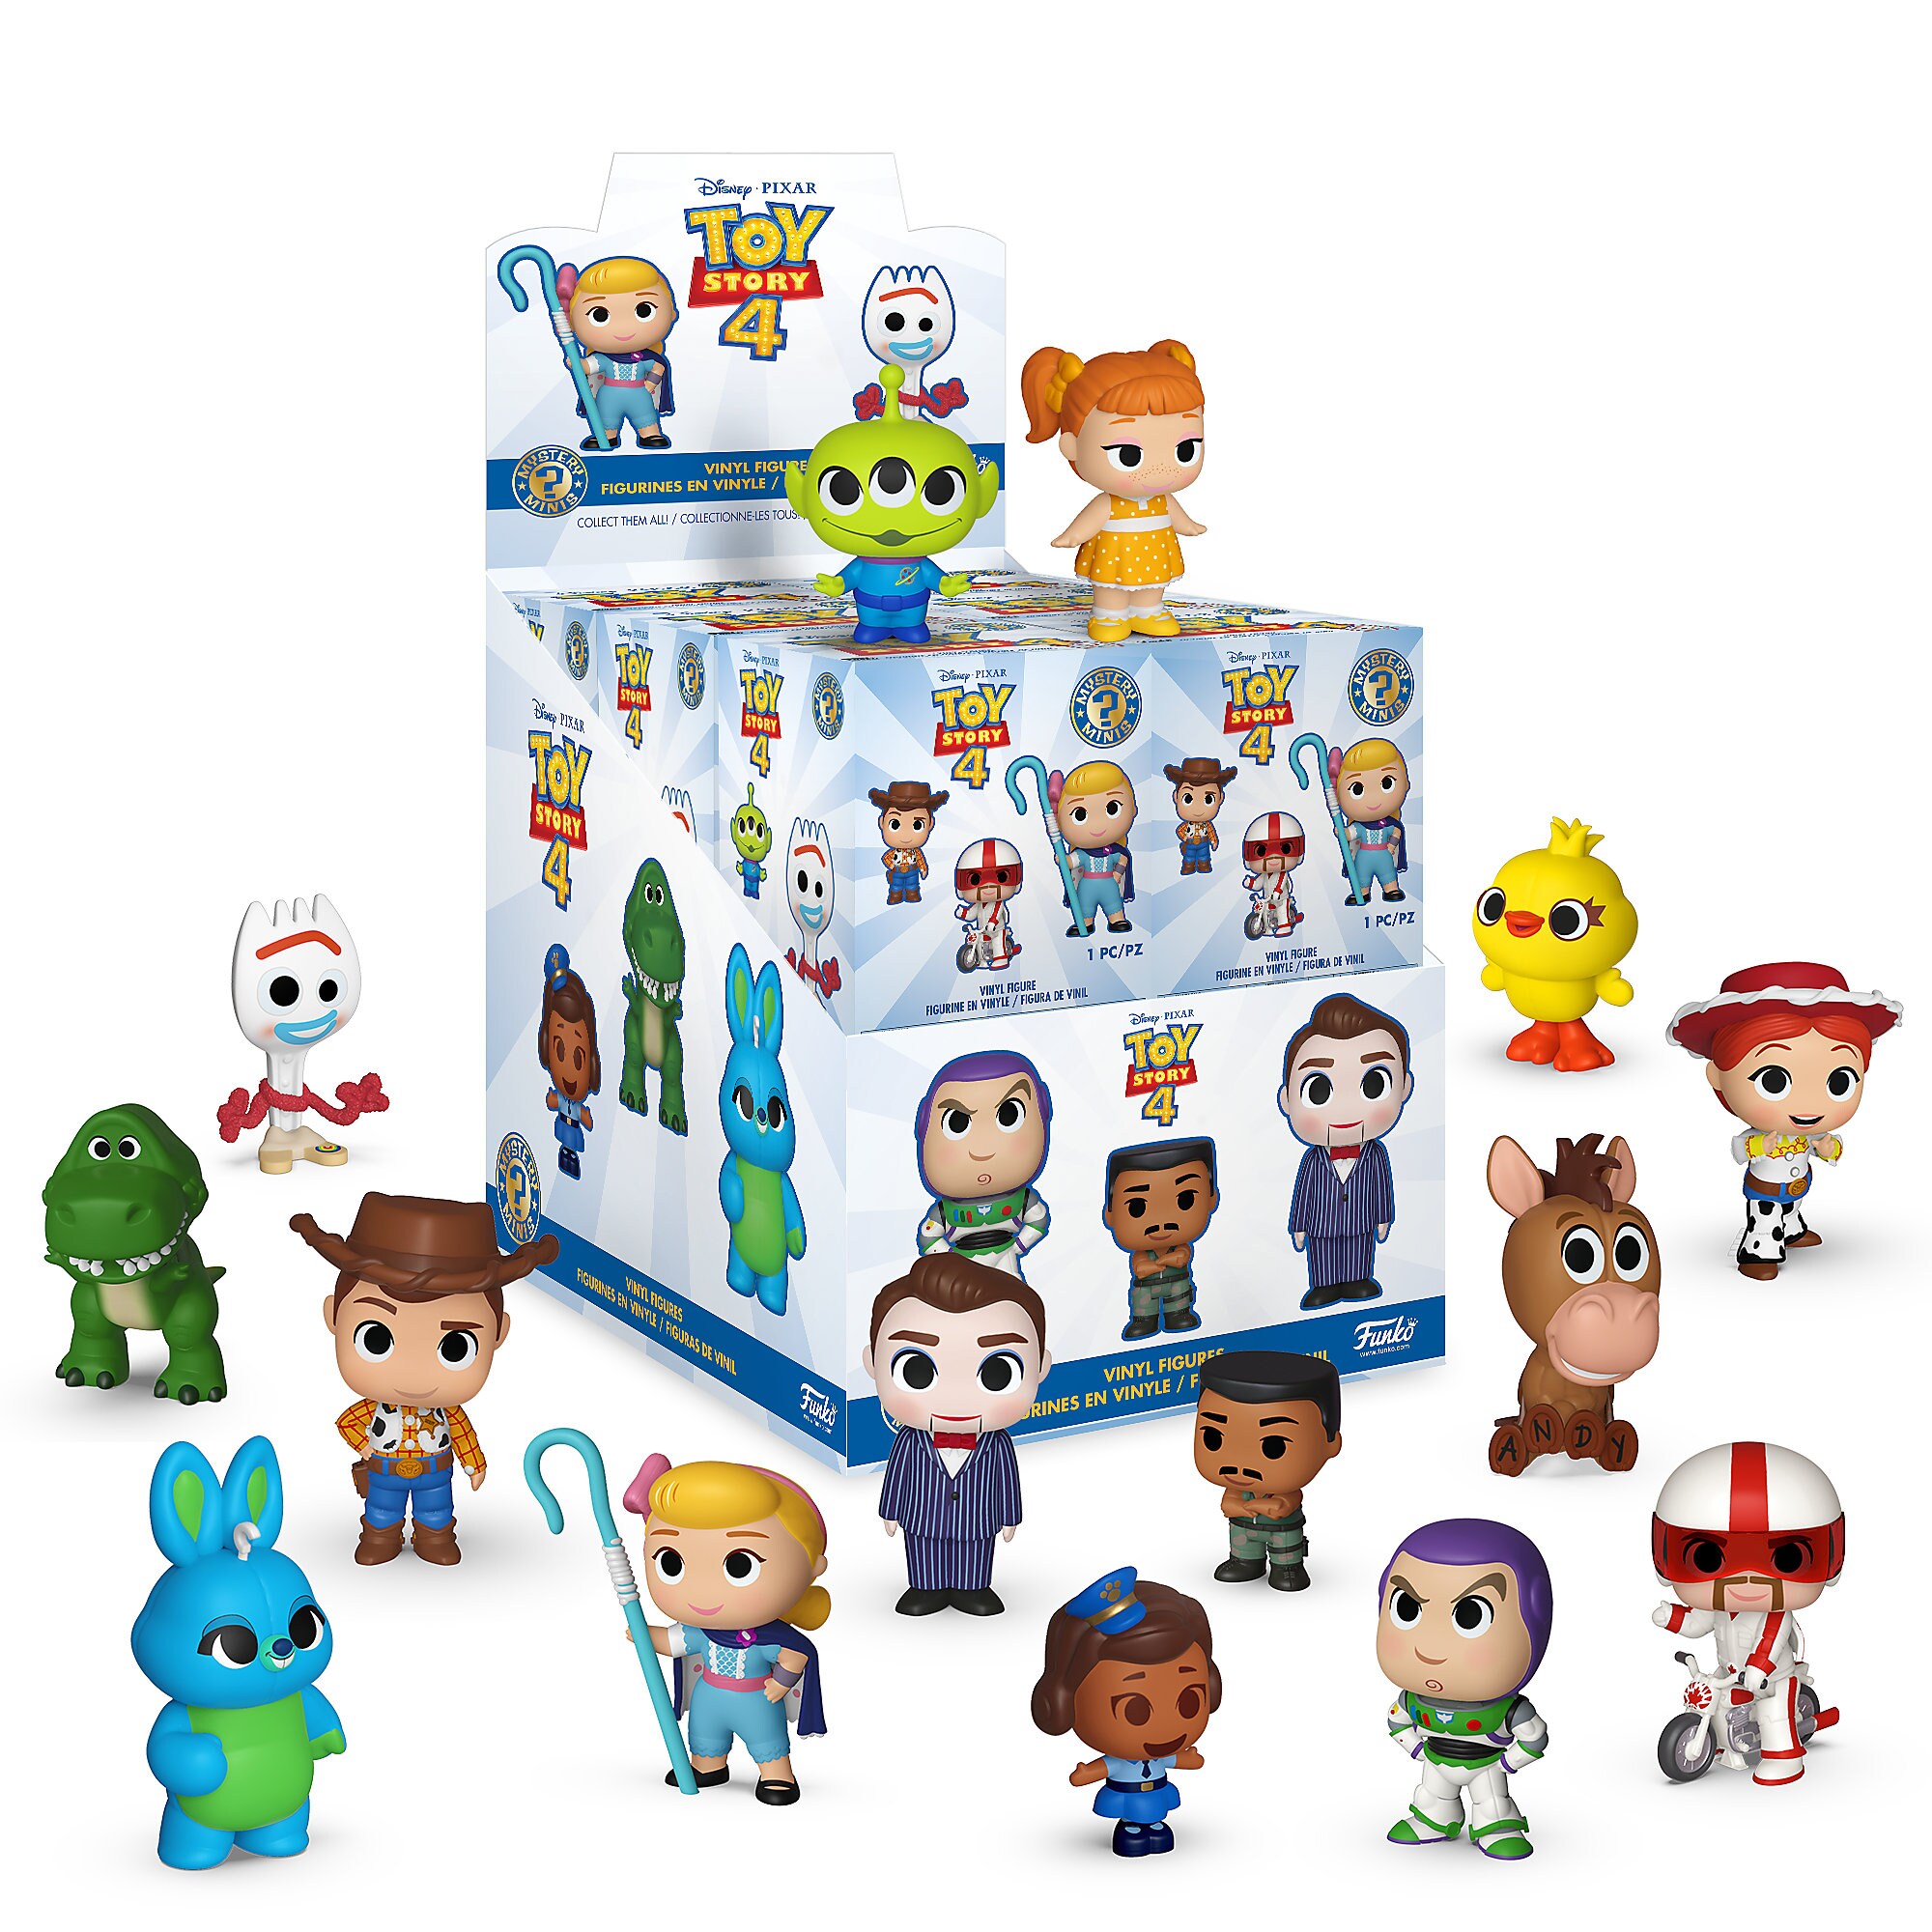 Toy Story 4 Mystery Minis Vinyl Figure by Funko